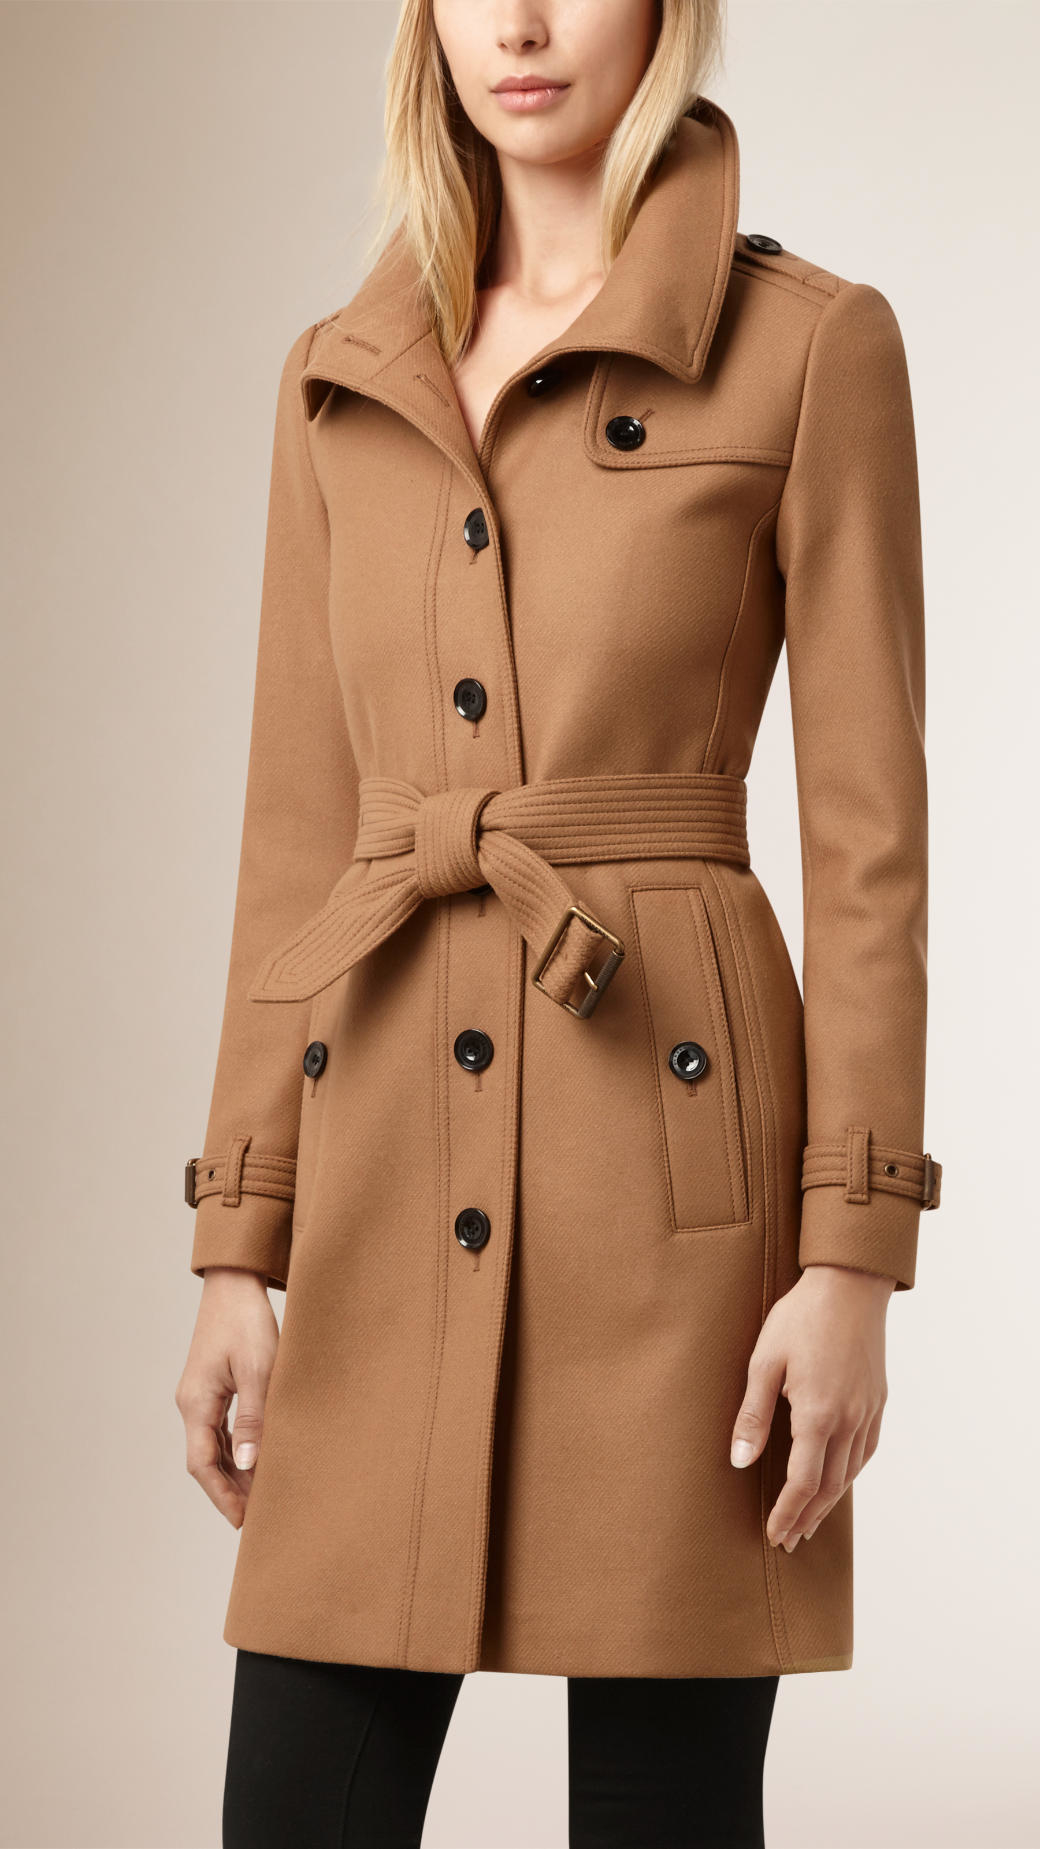 Burberry Virgin Wool Cashmere Blend Coat in Camel (Brown) - Lyst